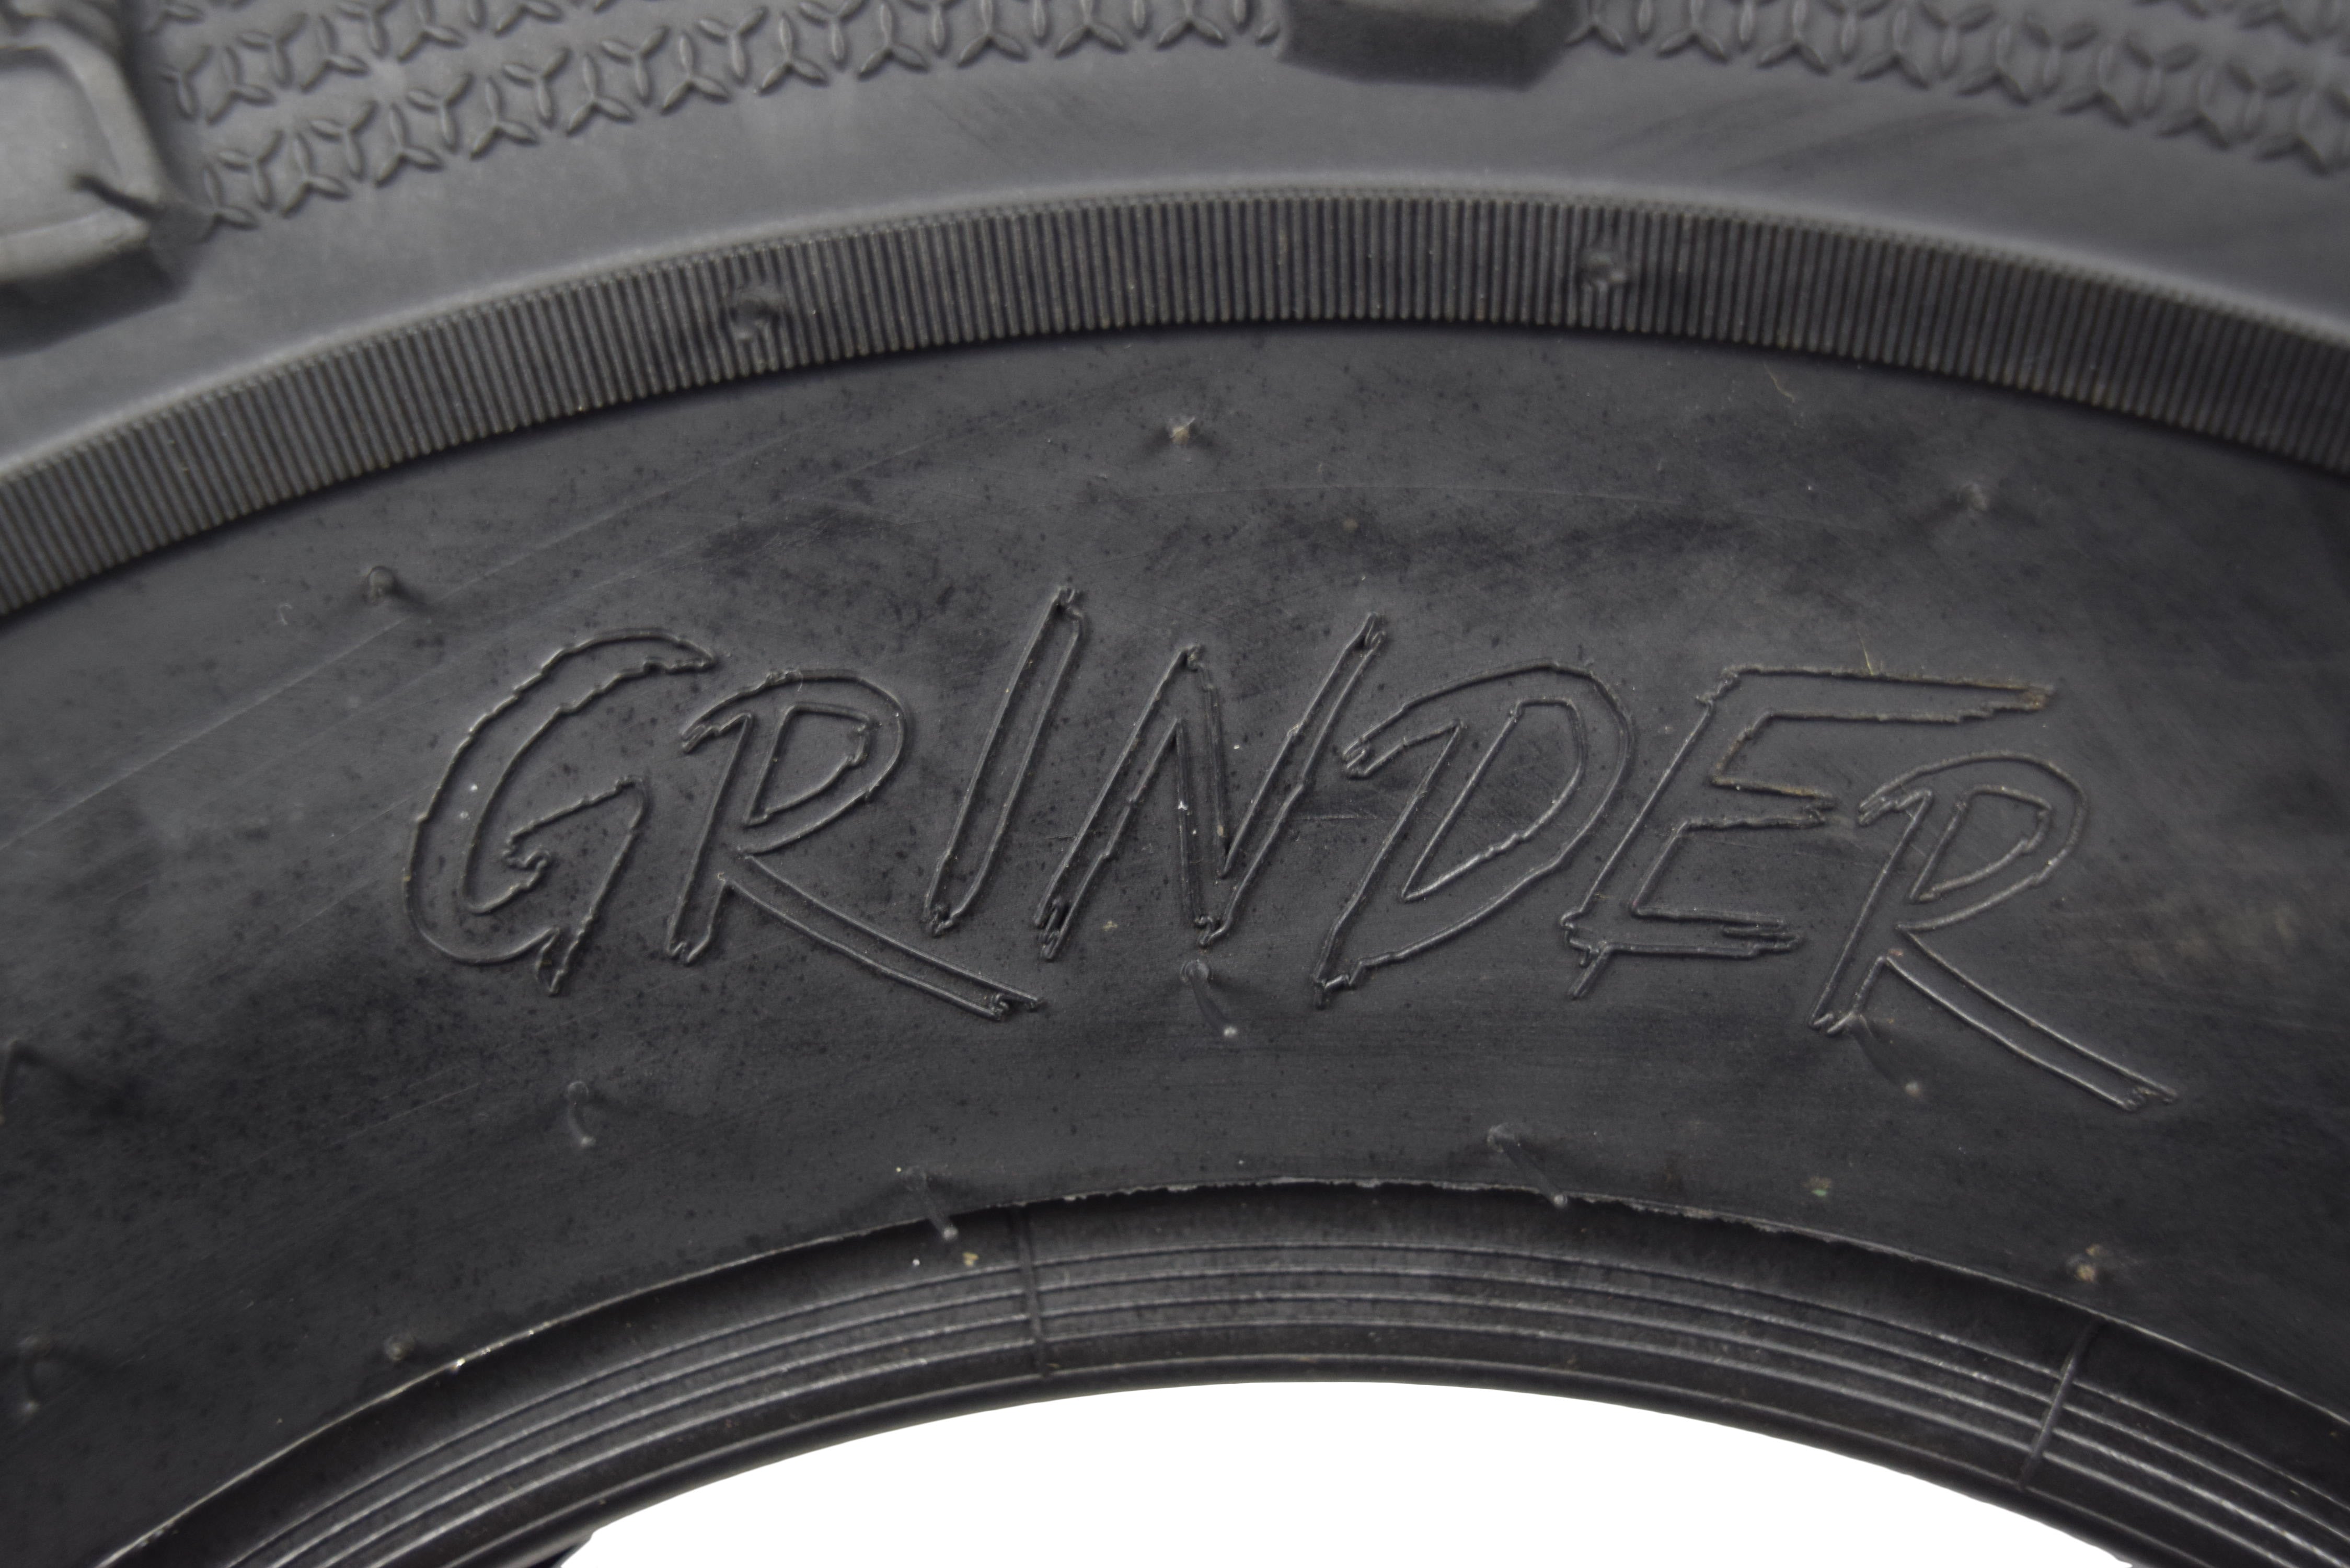 MASSFX-Grinder-22x7-11-Front-ATV-Tire-6-Ply-for-Soft-Hard-Pack-Ground-image-3